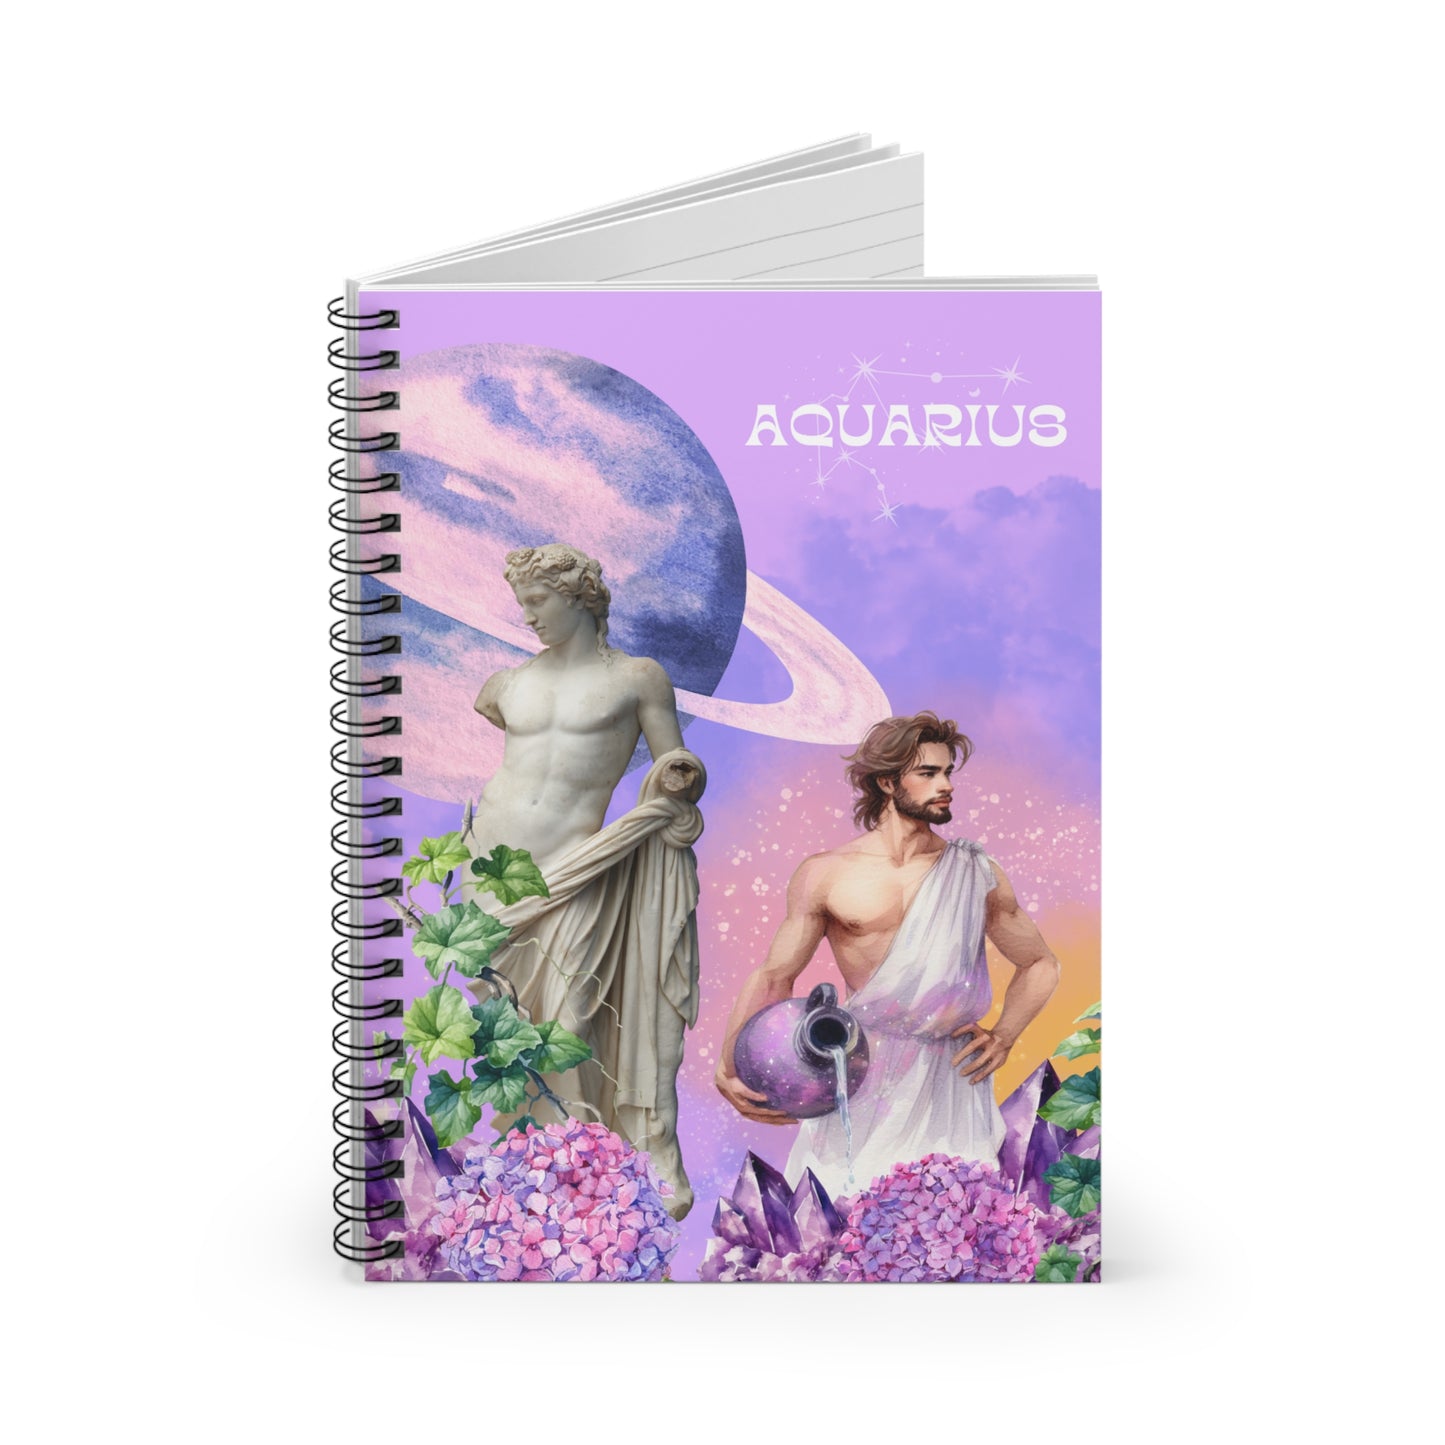 Aquarius Collage Spiral Notebook - Ruled Line